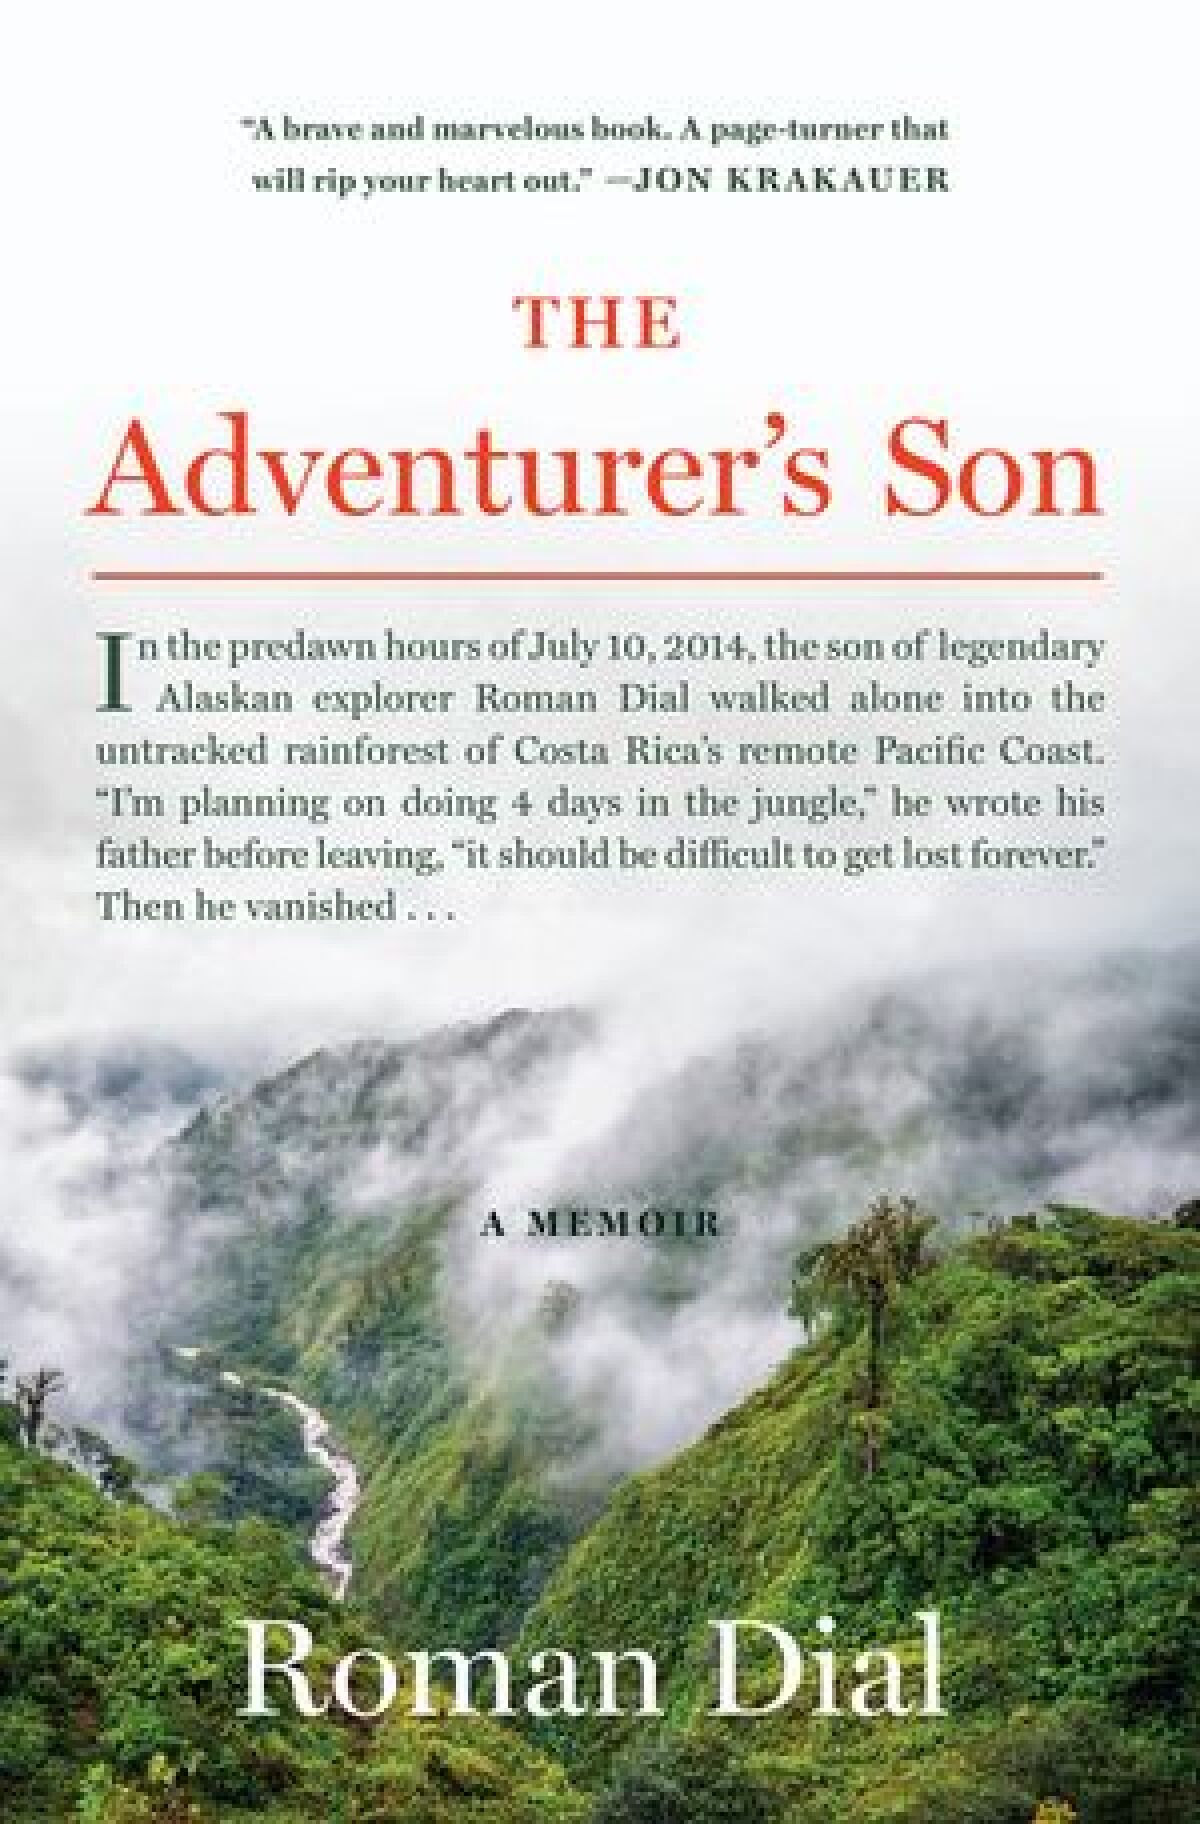 "The Adventurer's Son," by Roman Dial.